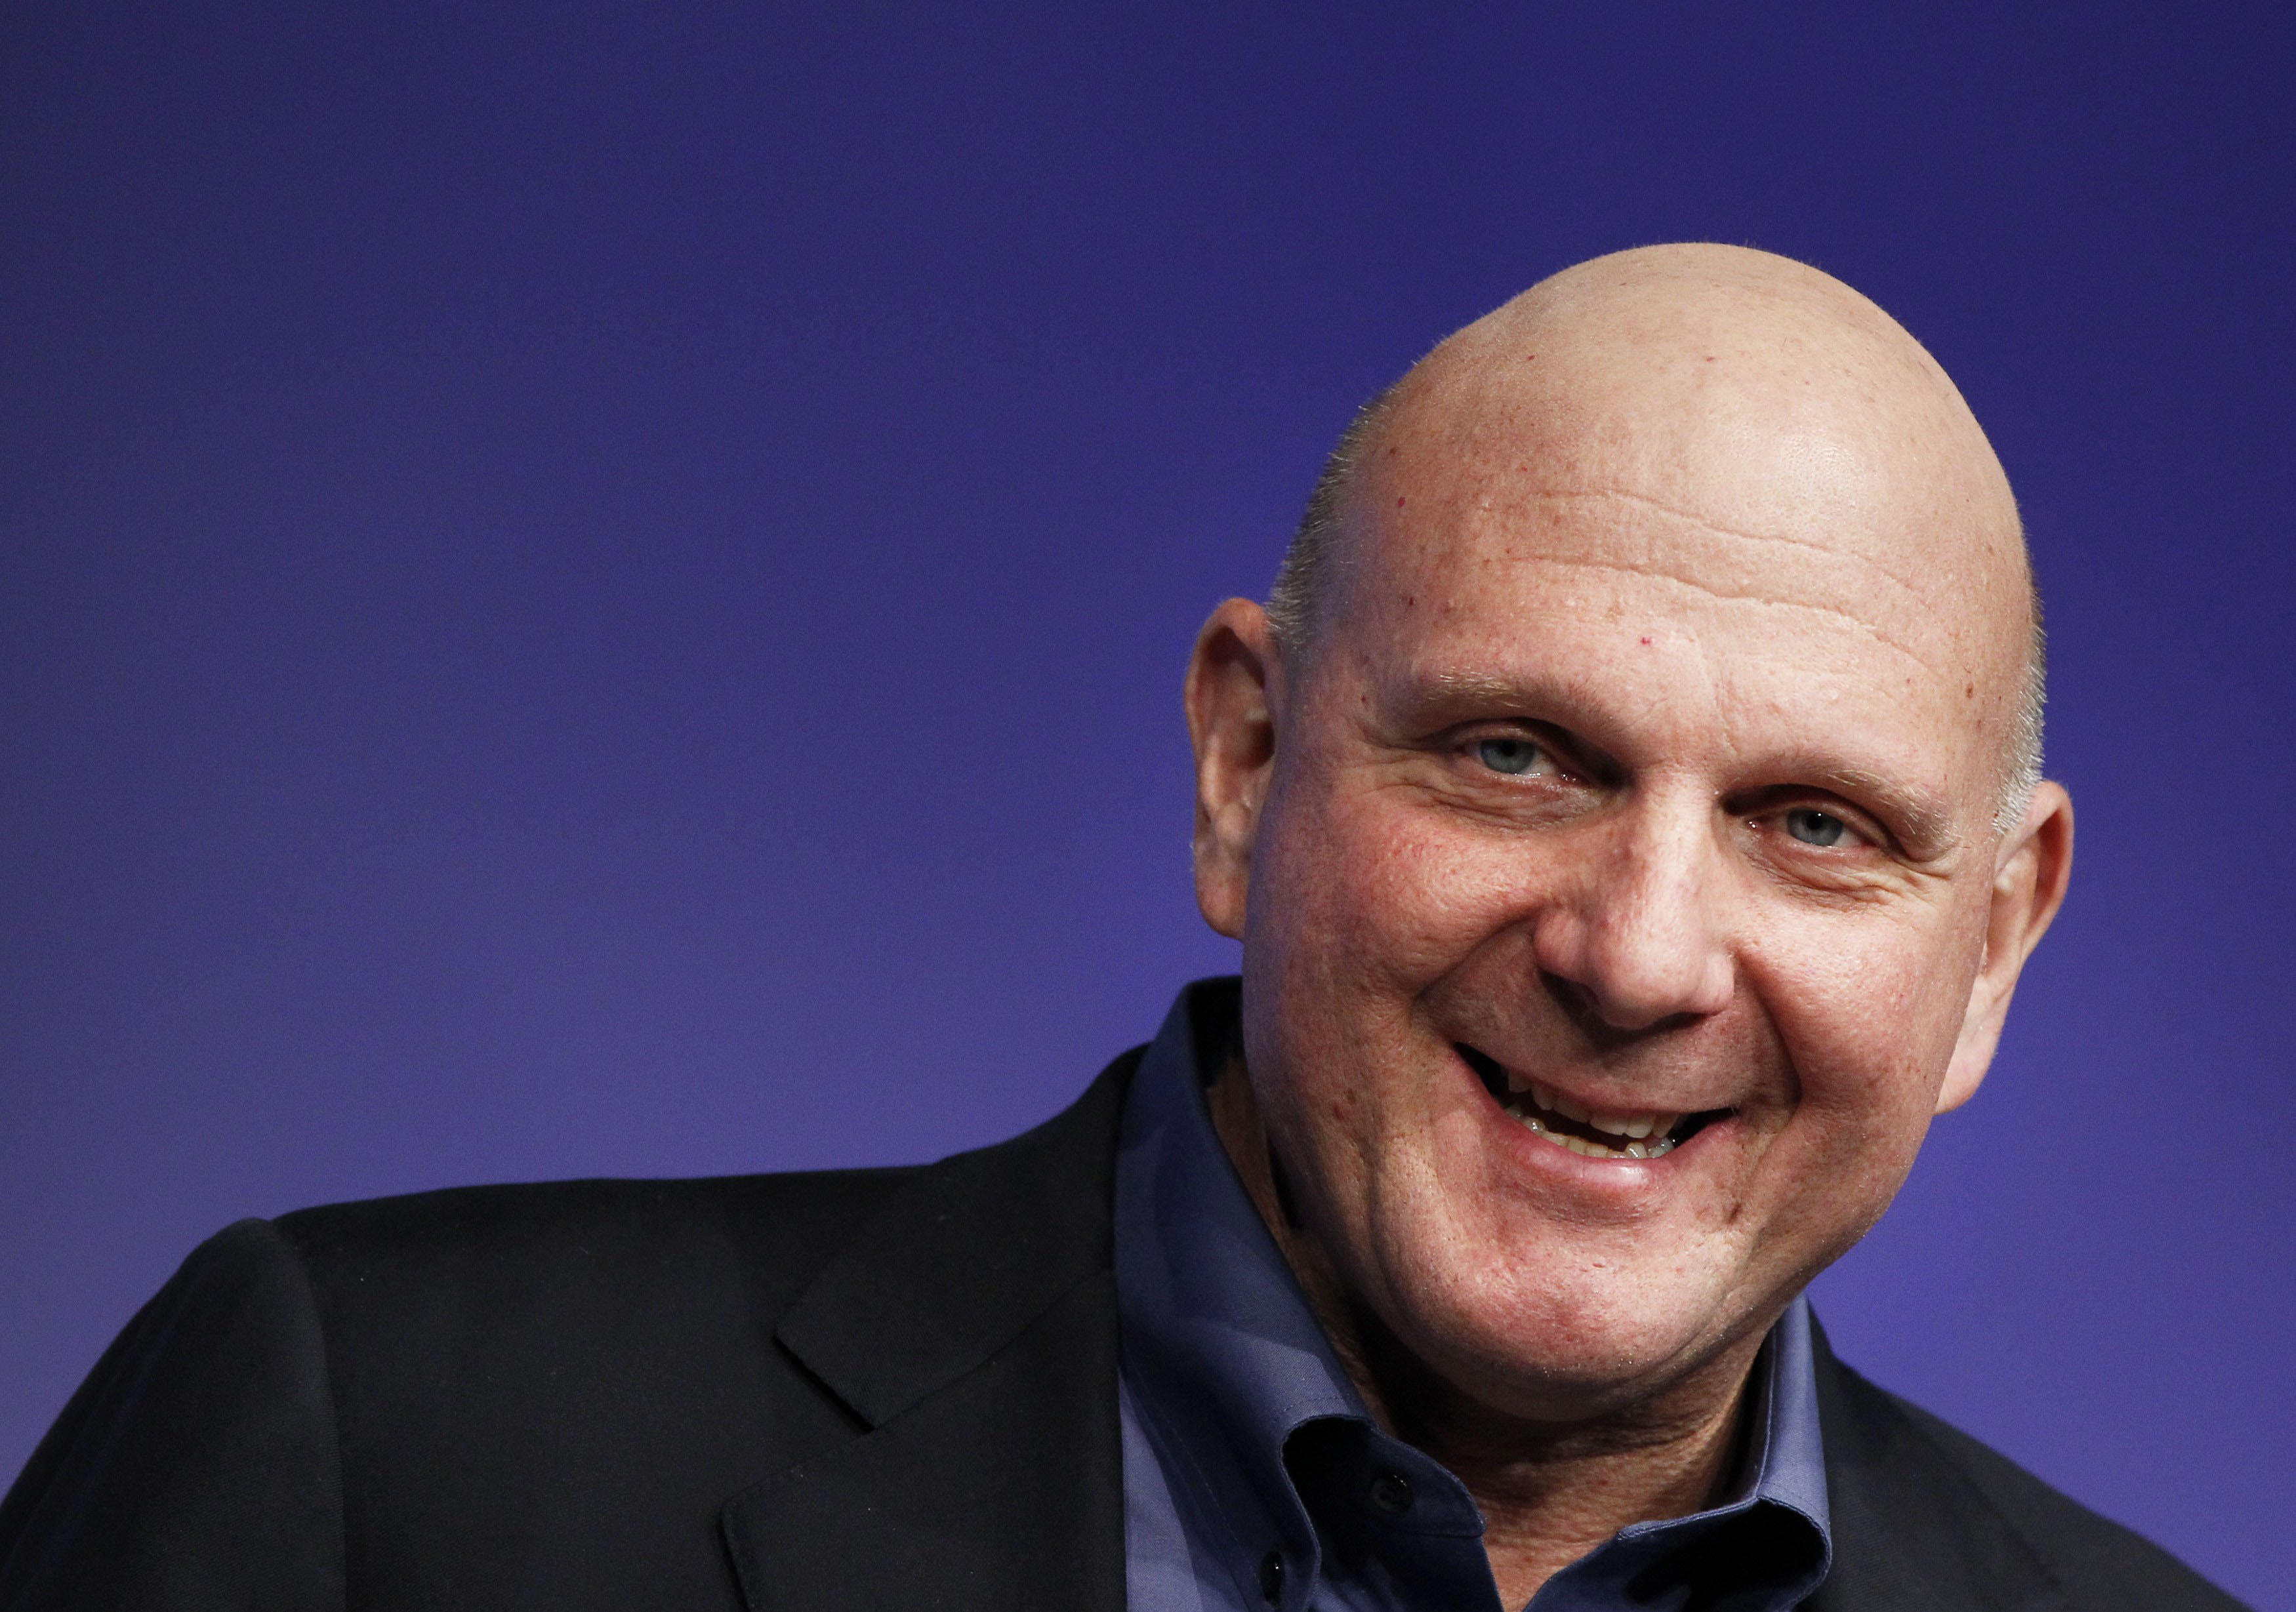 File photo of then Microsoft CEO Steve Ballmer speaking at the launch of Windows 8 operating system in New York